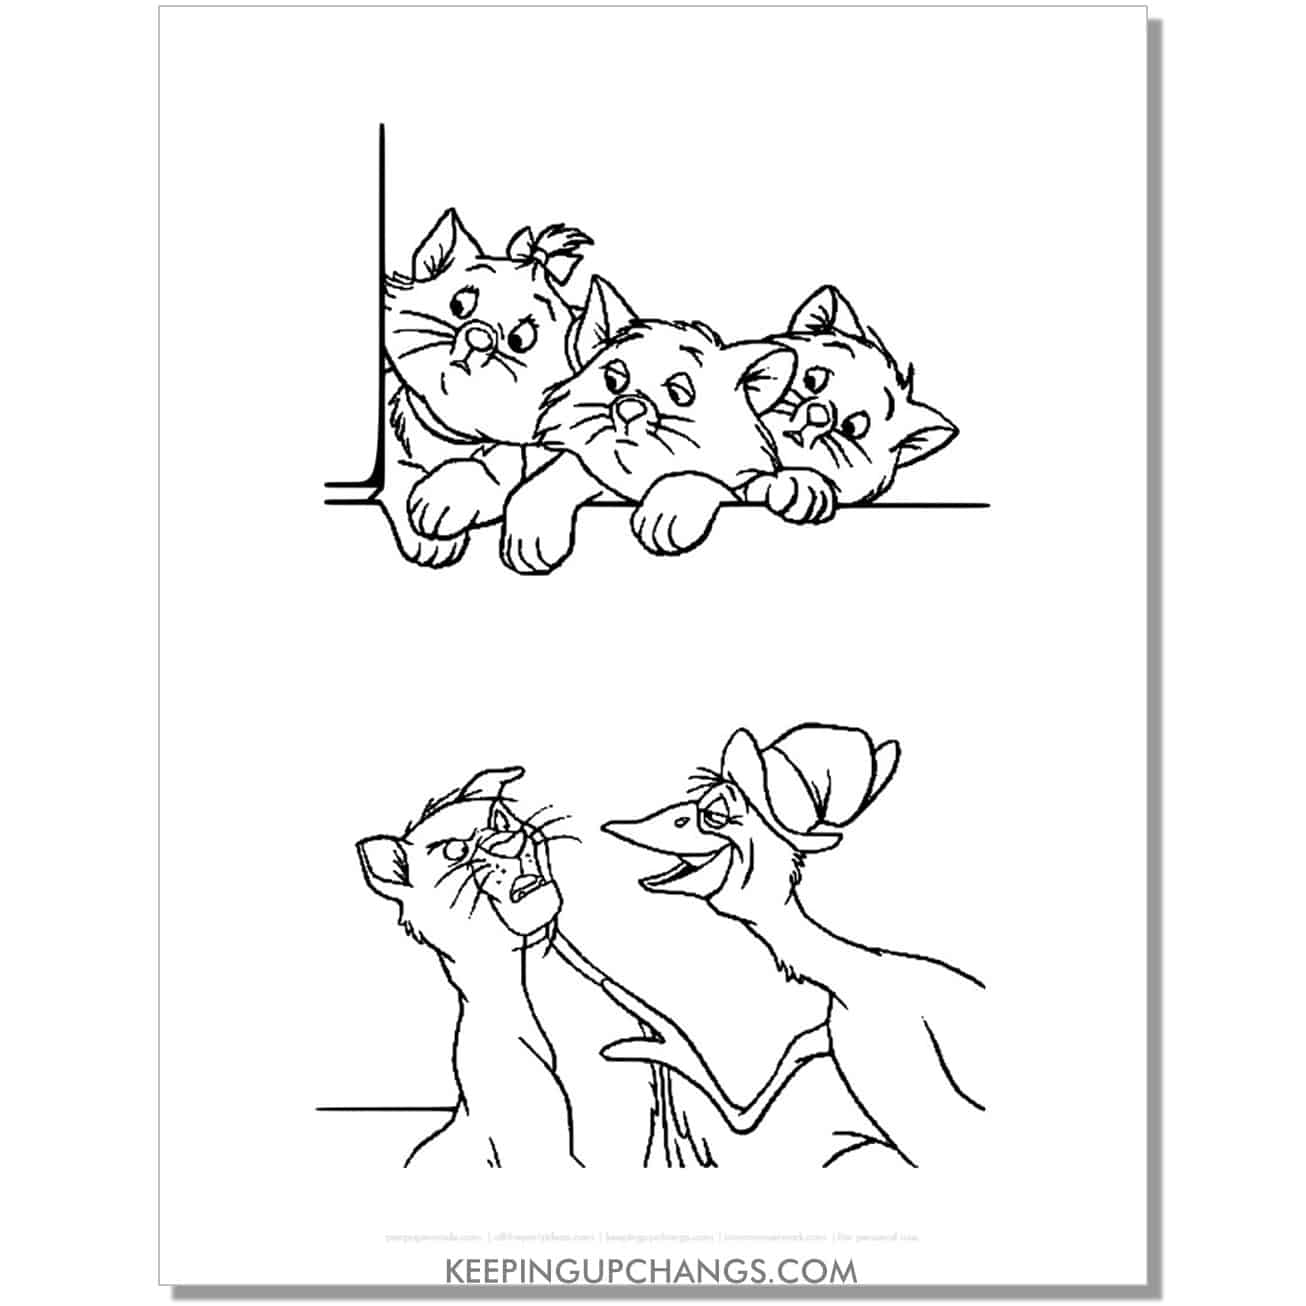 marie, toulouse, berlioz at the window aristocats coloring page, sheet.